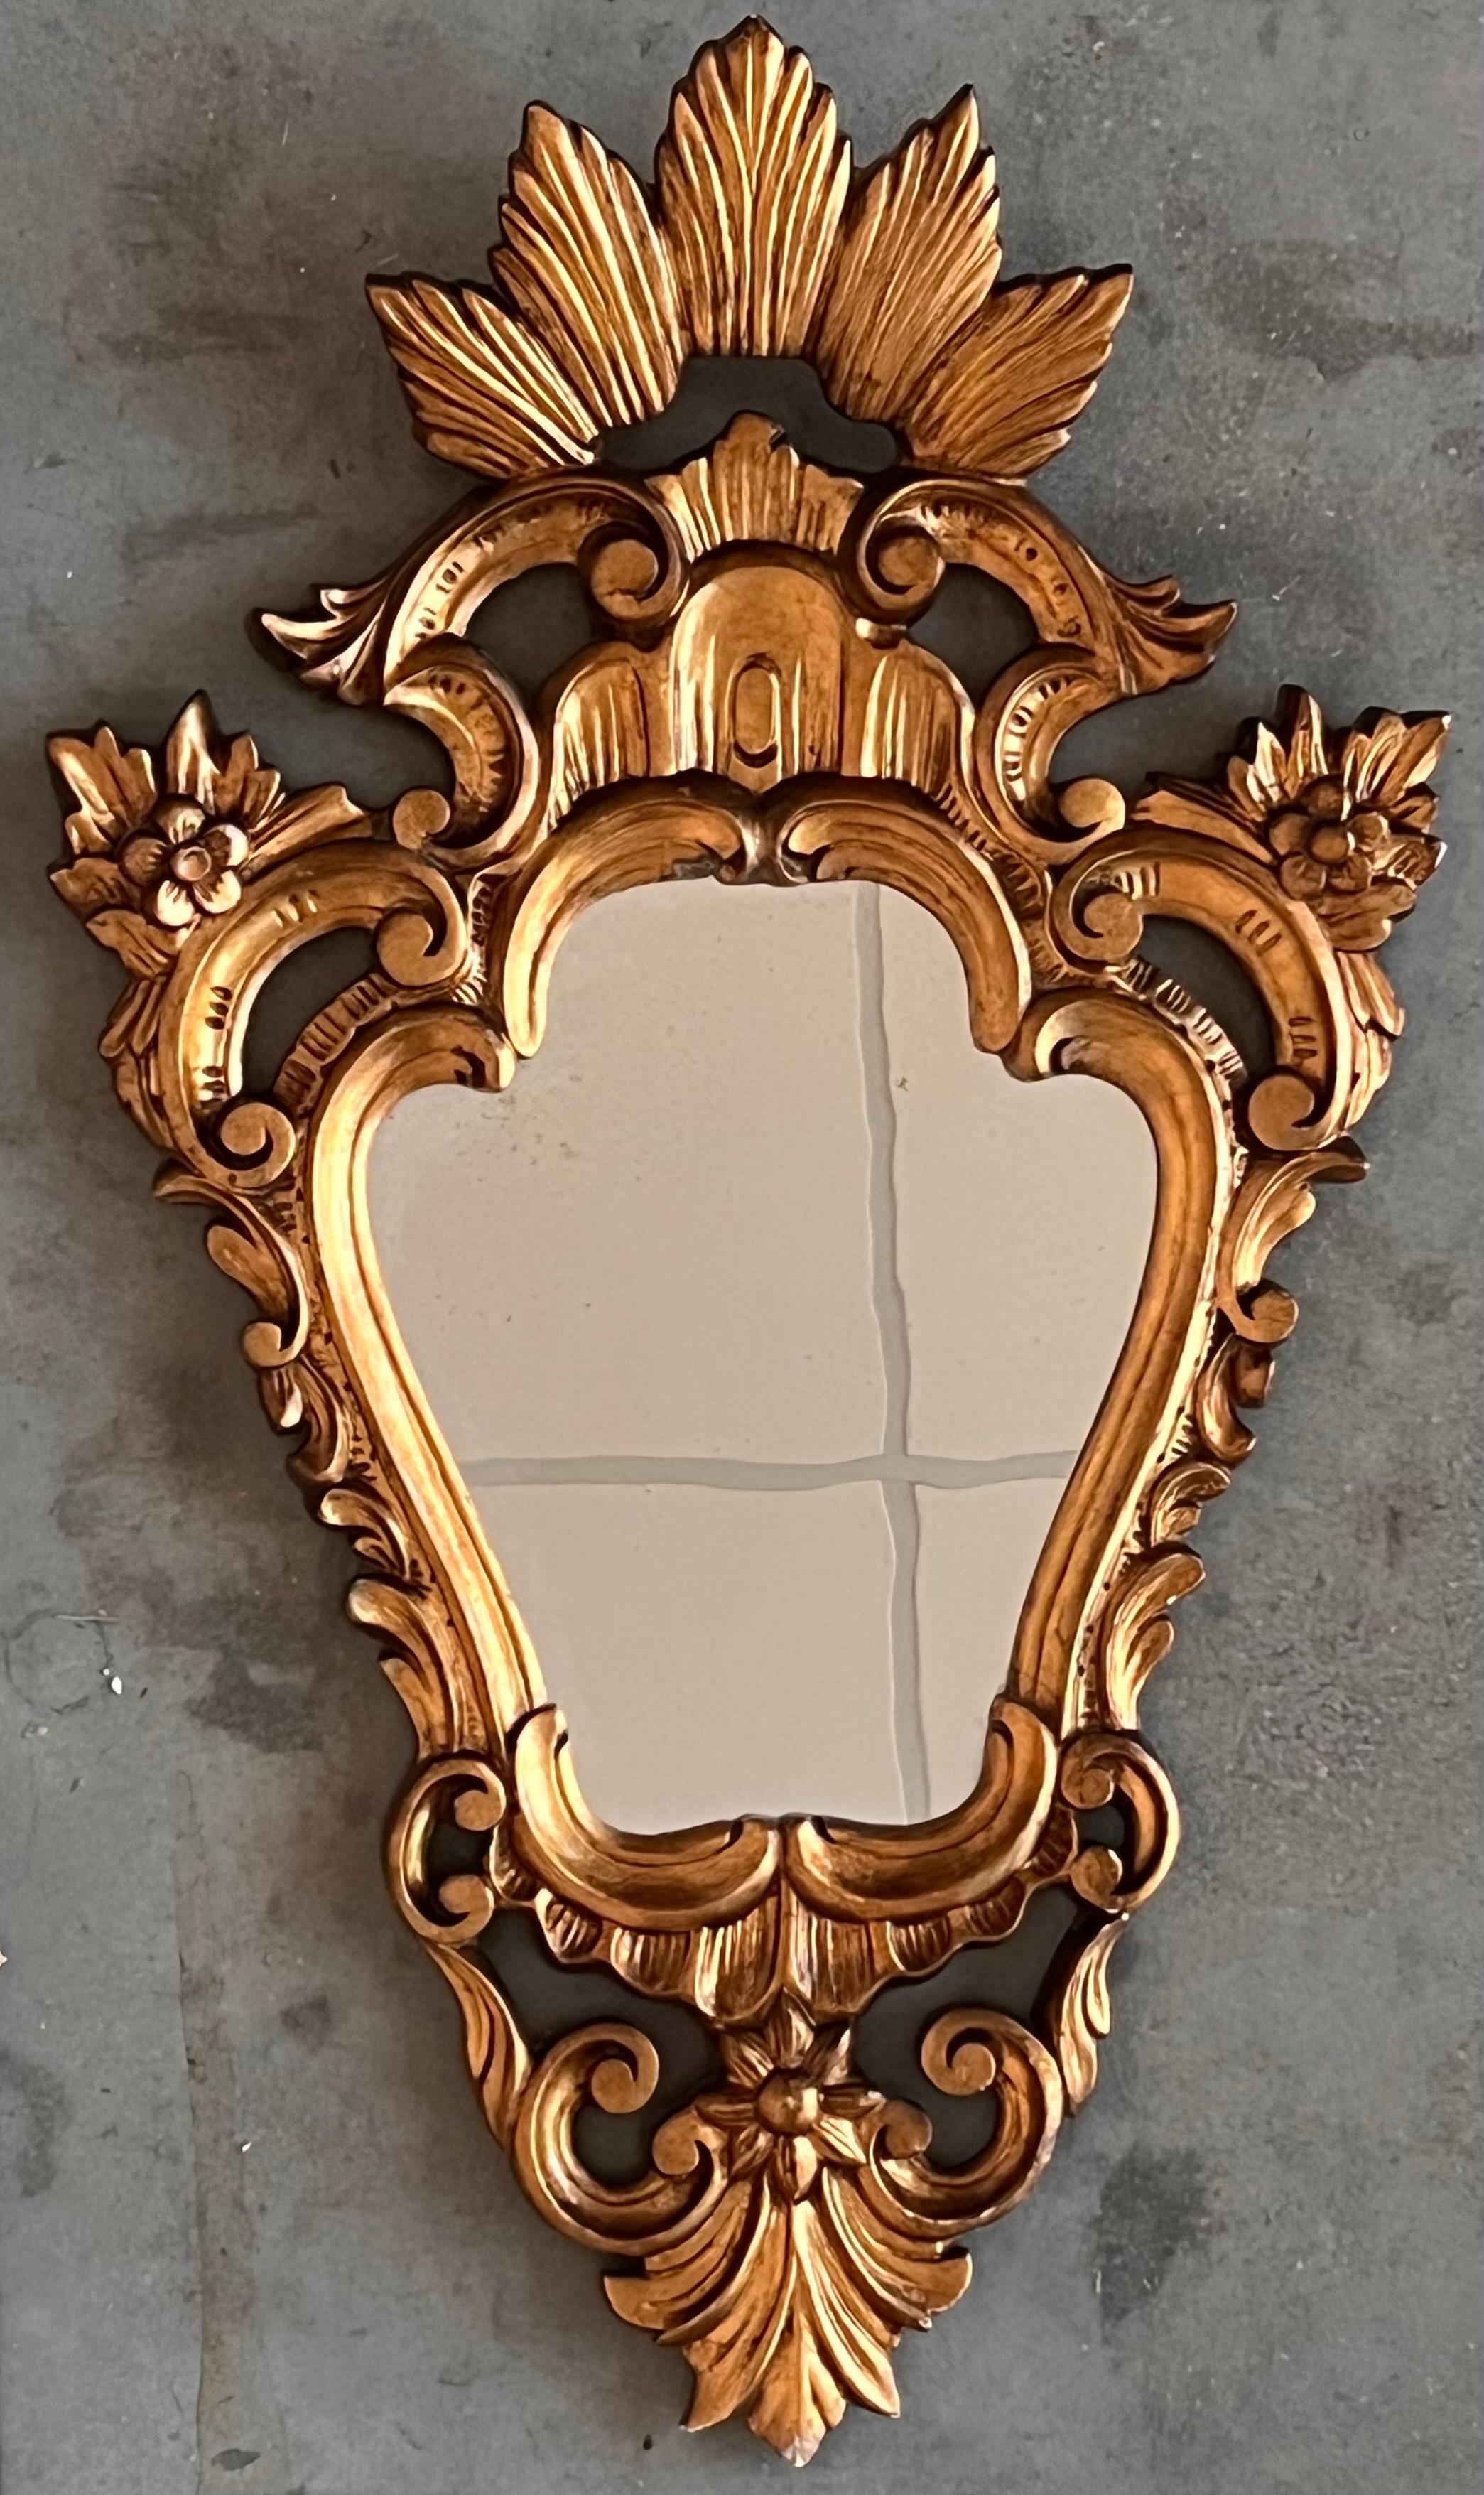 Antique cornucopia mirrors. 
By unknown manufacturer from France, circa S.XIX.  In original condition, with minor wear consistent with age and use, preserving a beautiful patina.